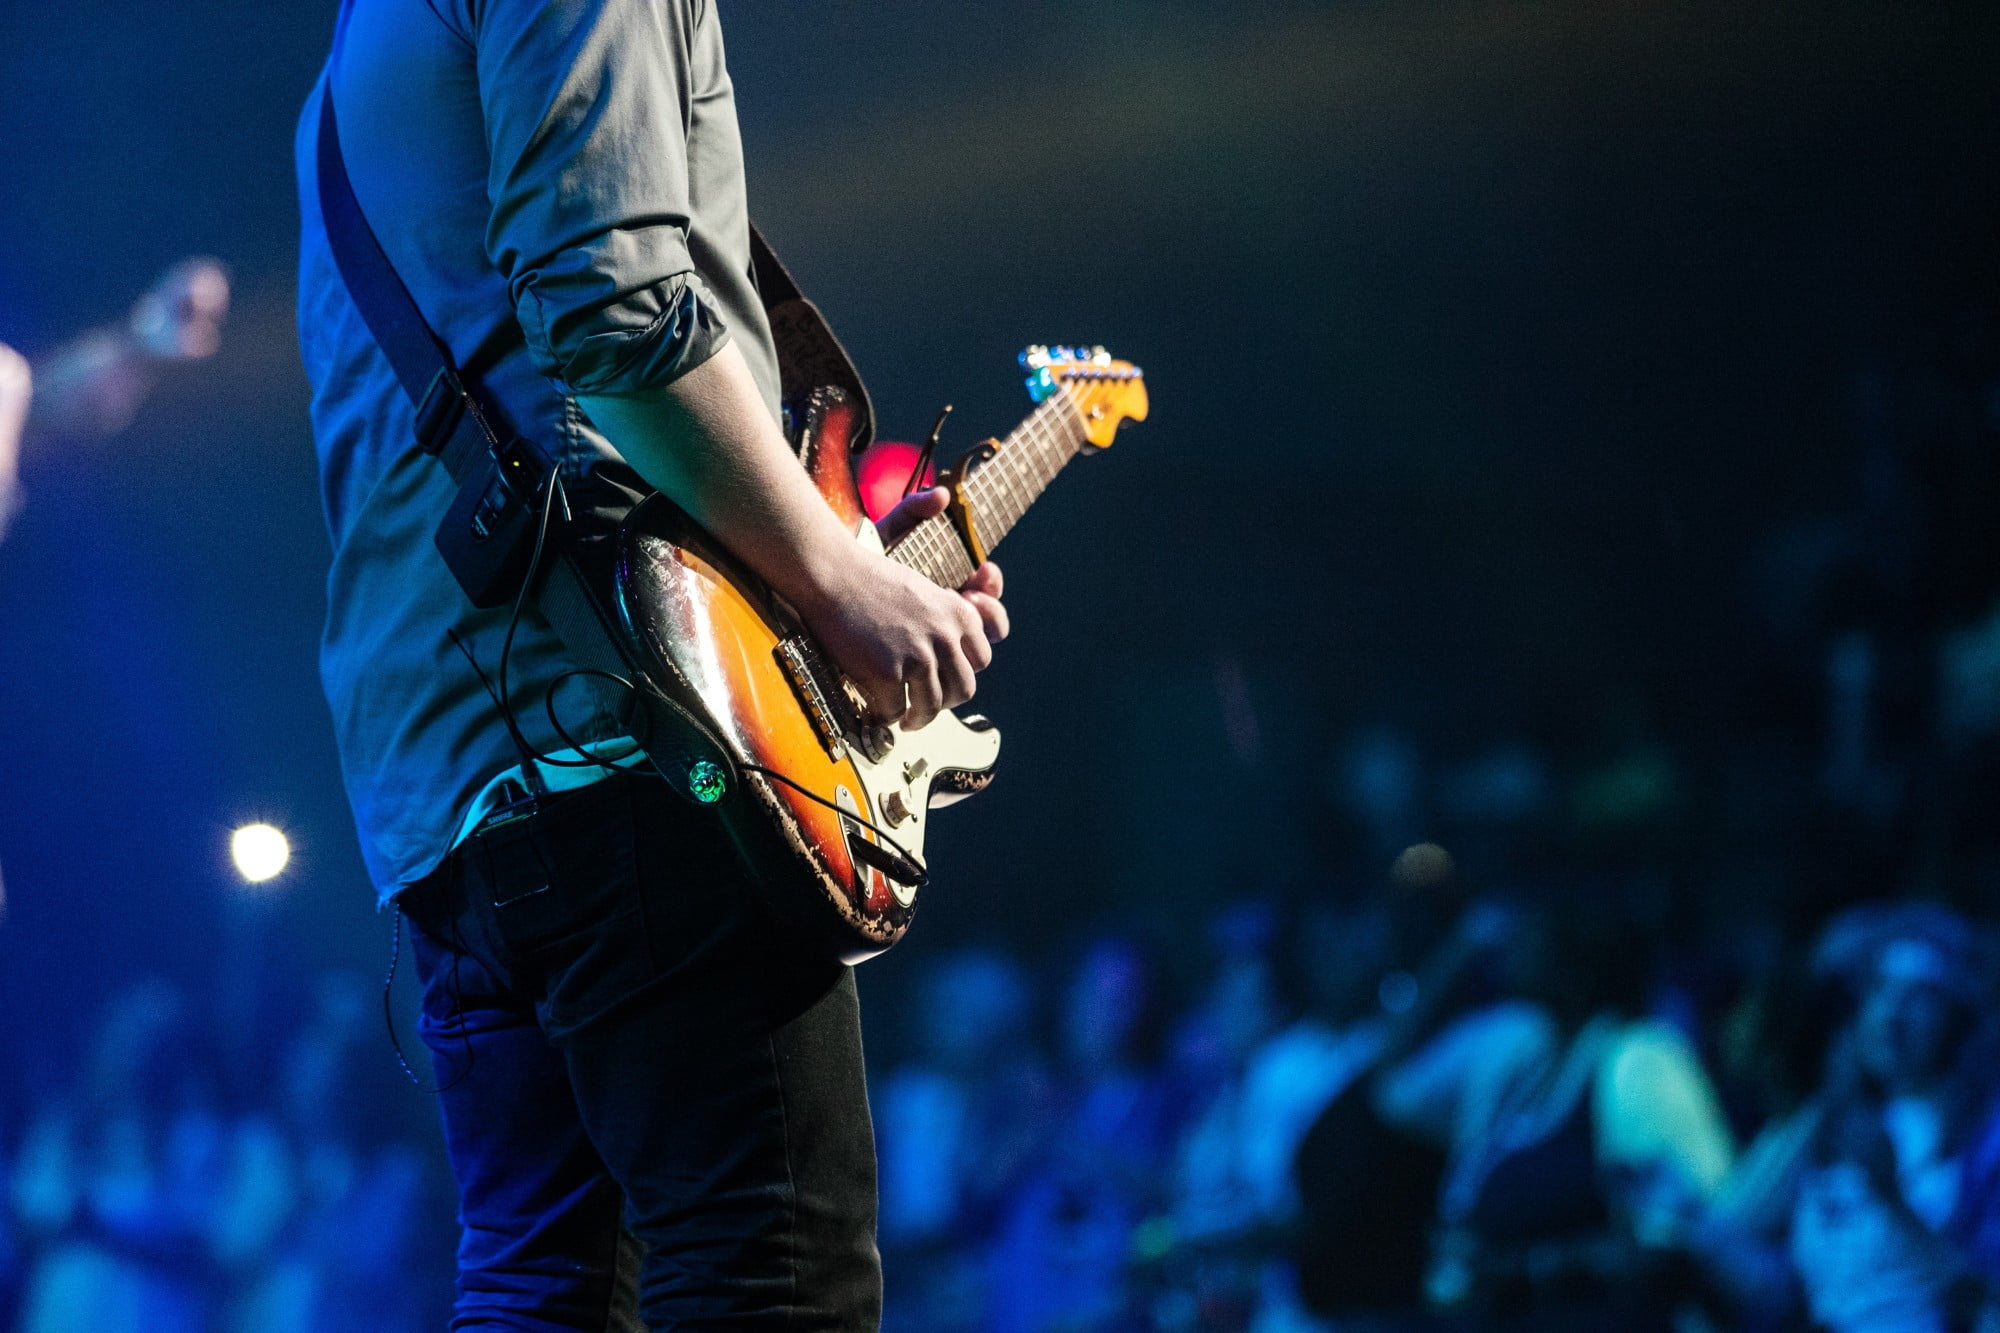 There are several awesome reasons for experiencing live music. Learn more about these advantages by checking out this guide.